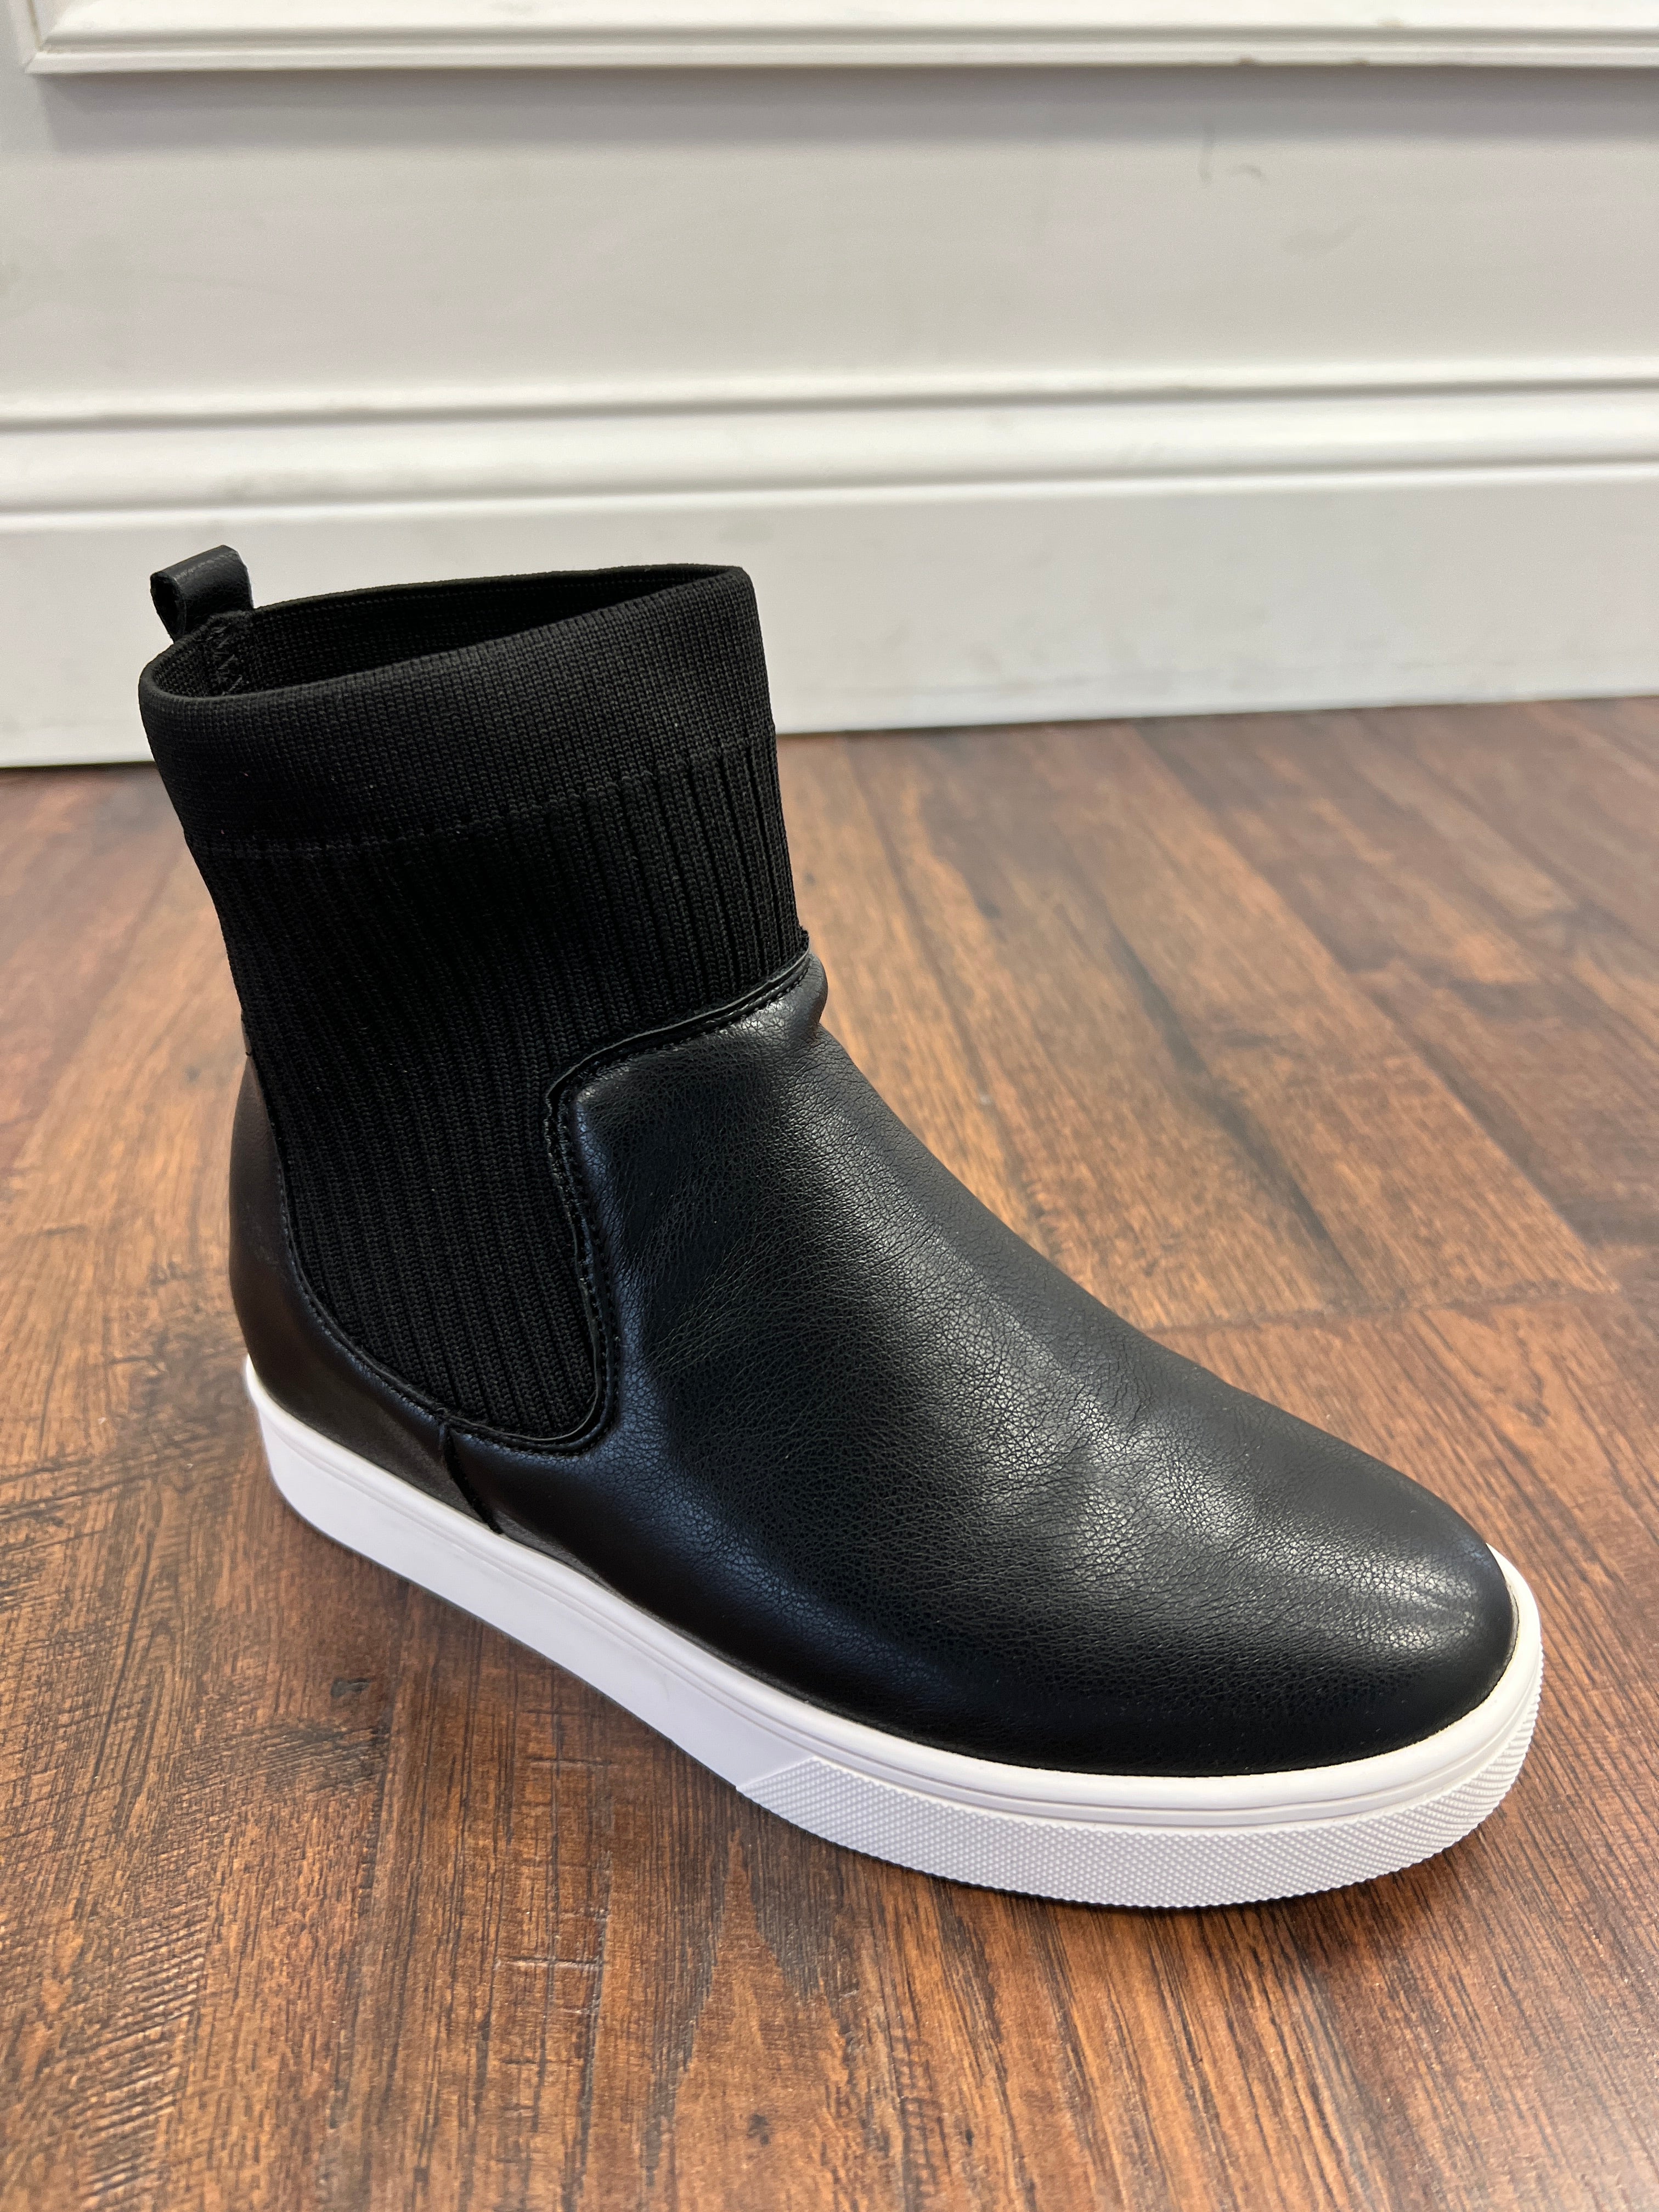 Sweater Weather Boots-440 Footwear-Simply Stylish Boutique-Simply Stylish Boutique | Women’s & Kid’s Fashion | Paducah, KY